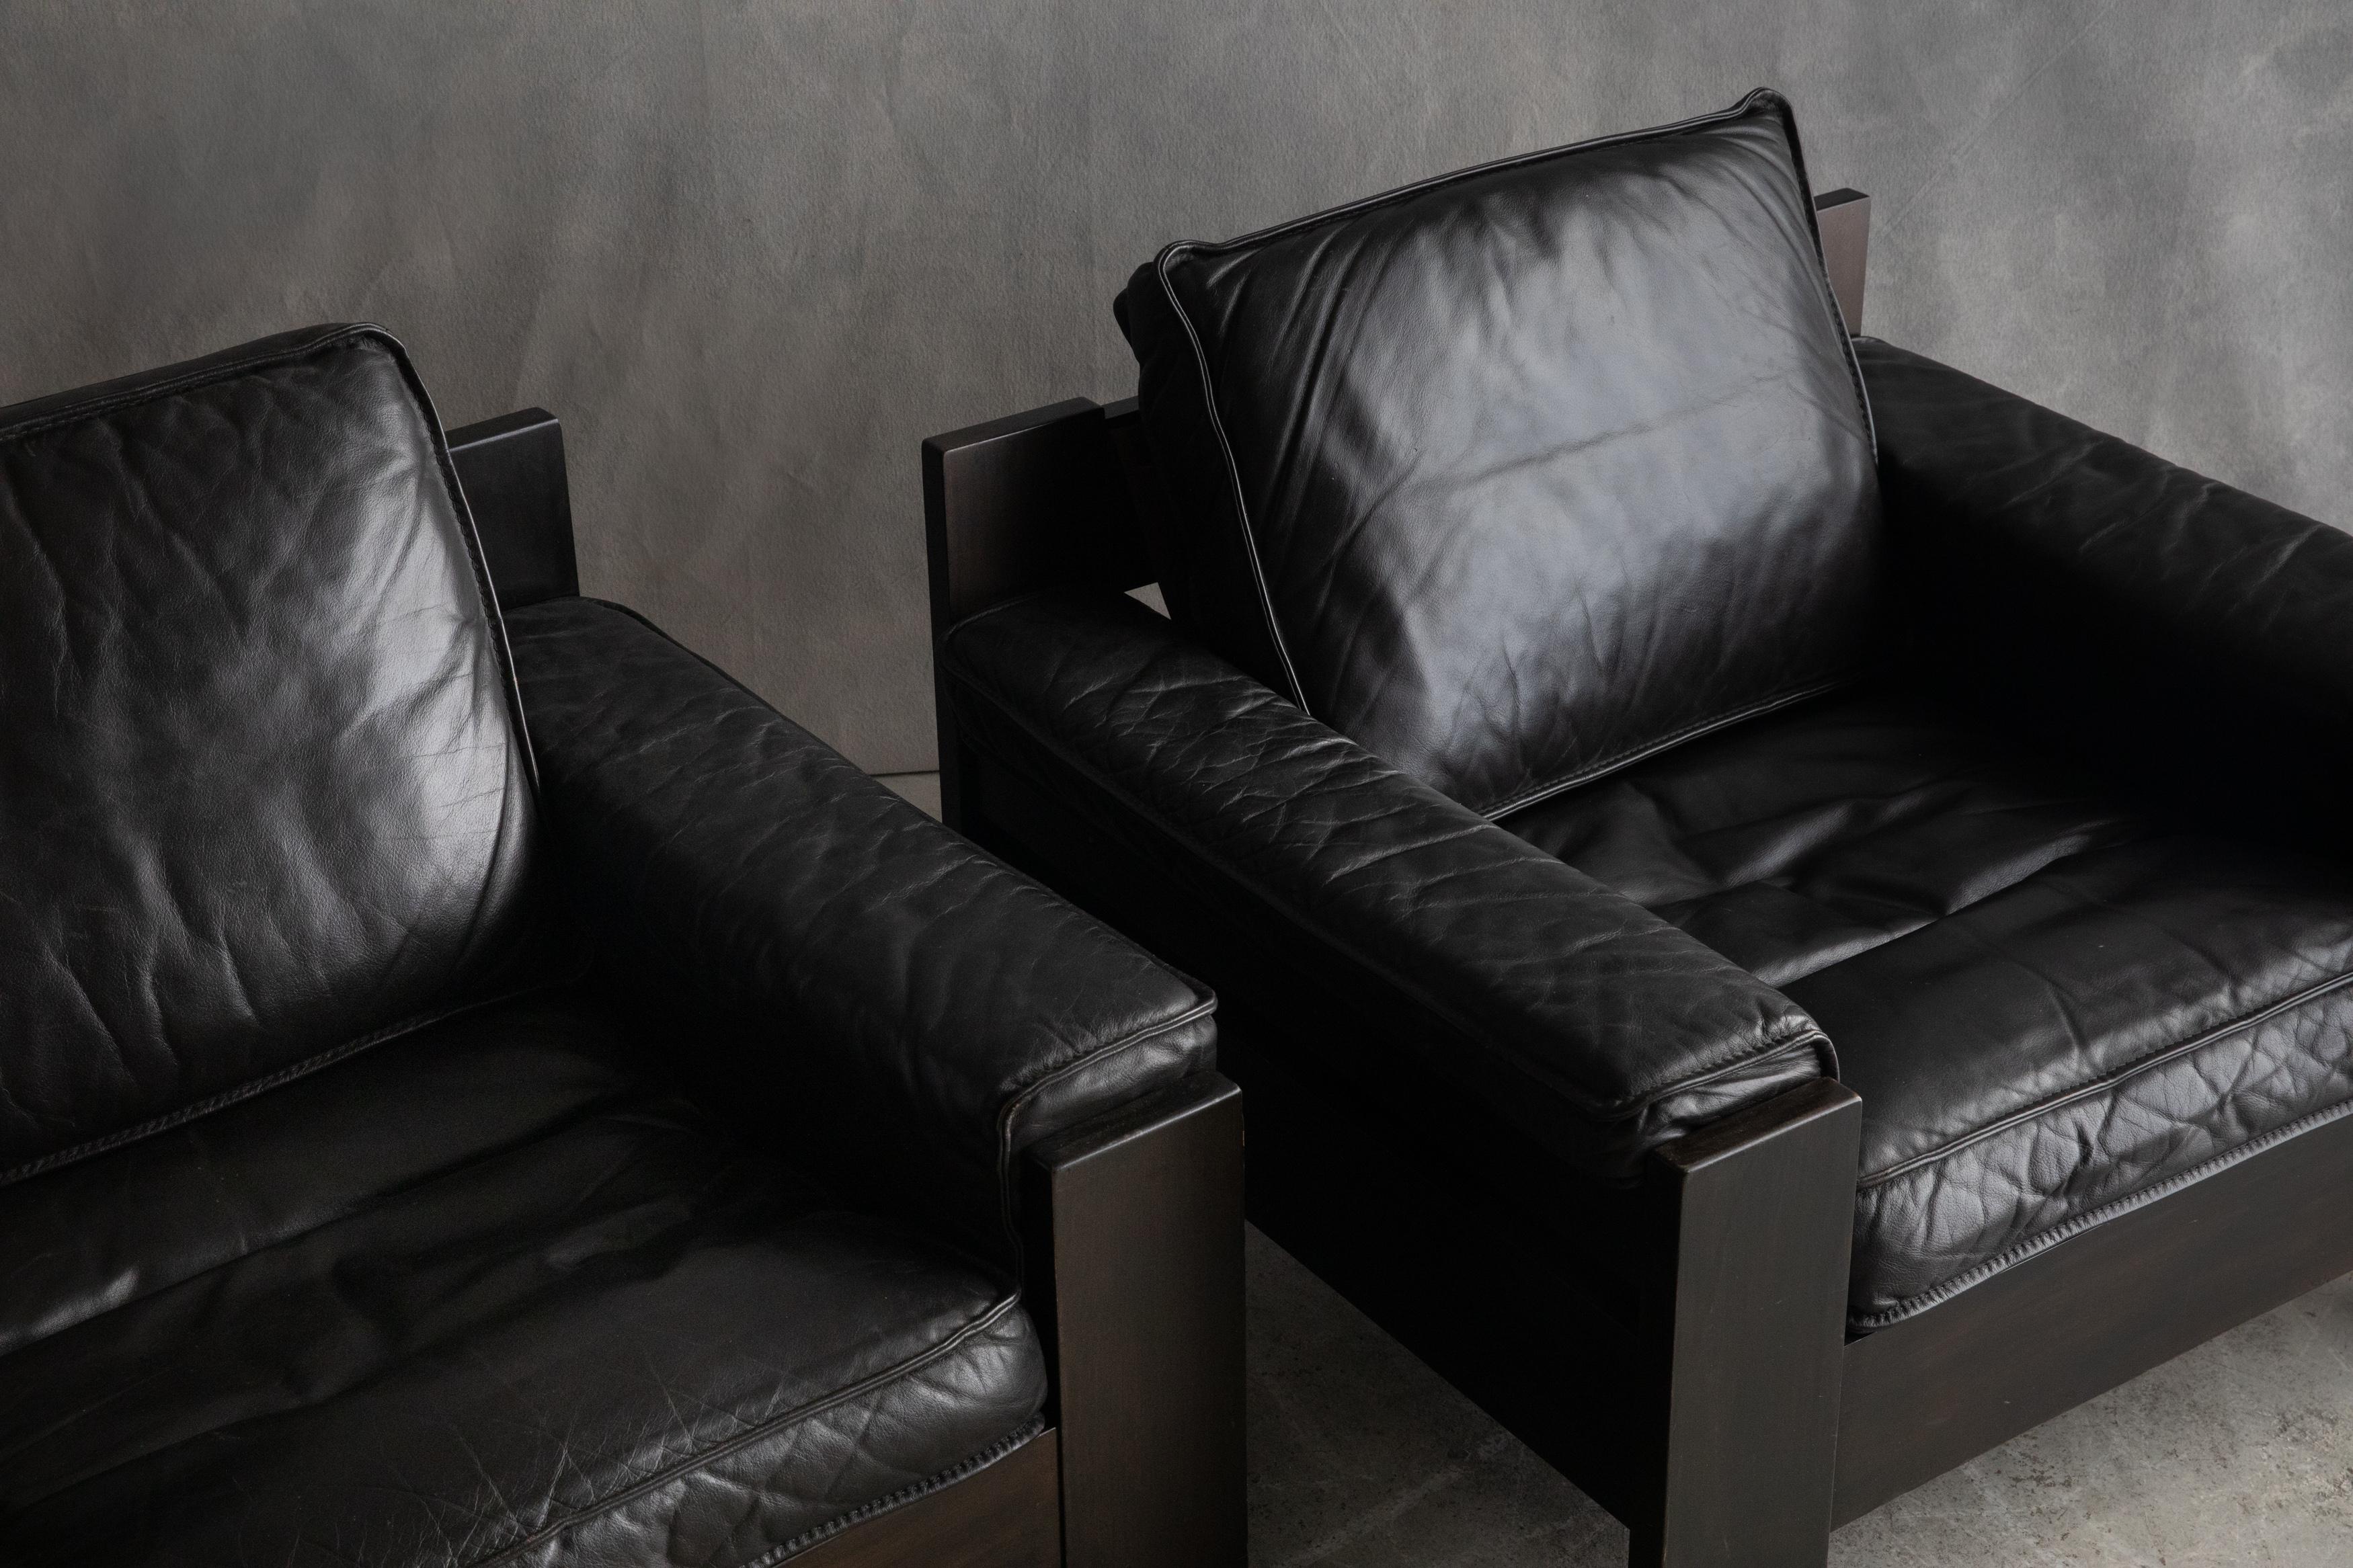 European Vintage Pair of Leather Lounge Chairs from Denmark, circa 1970